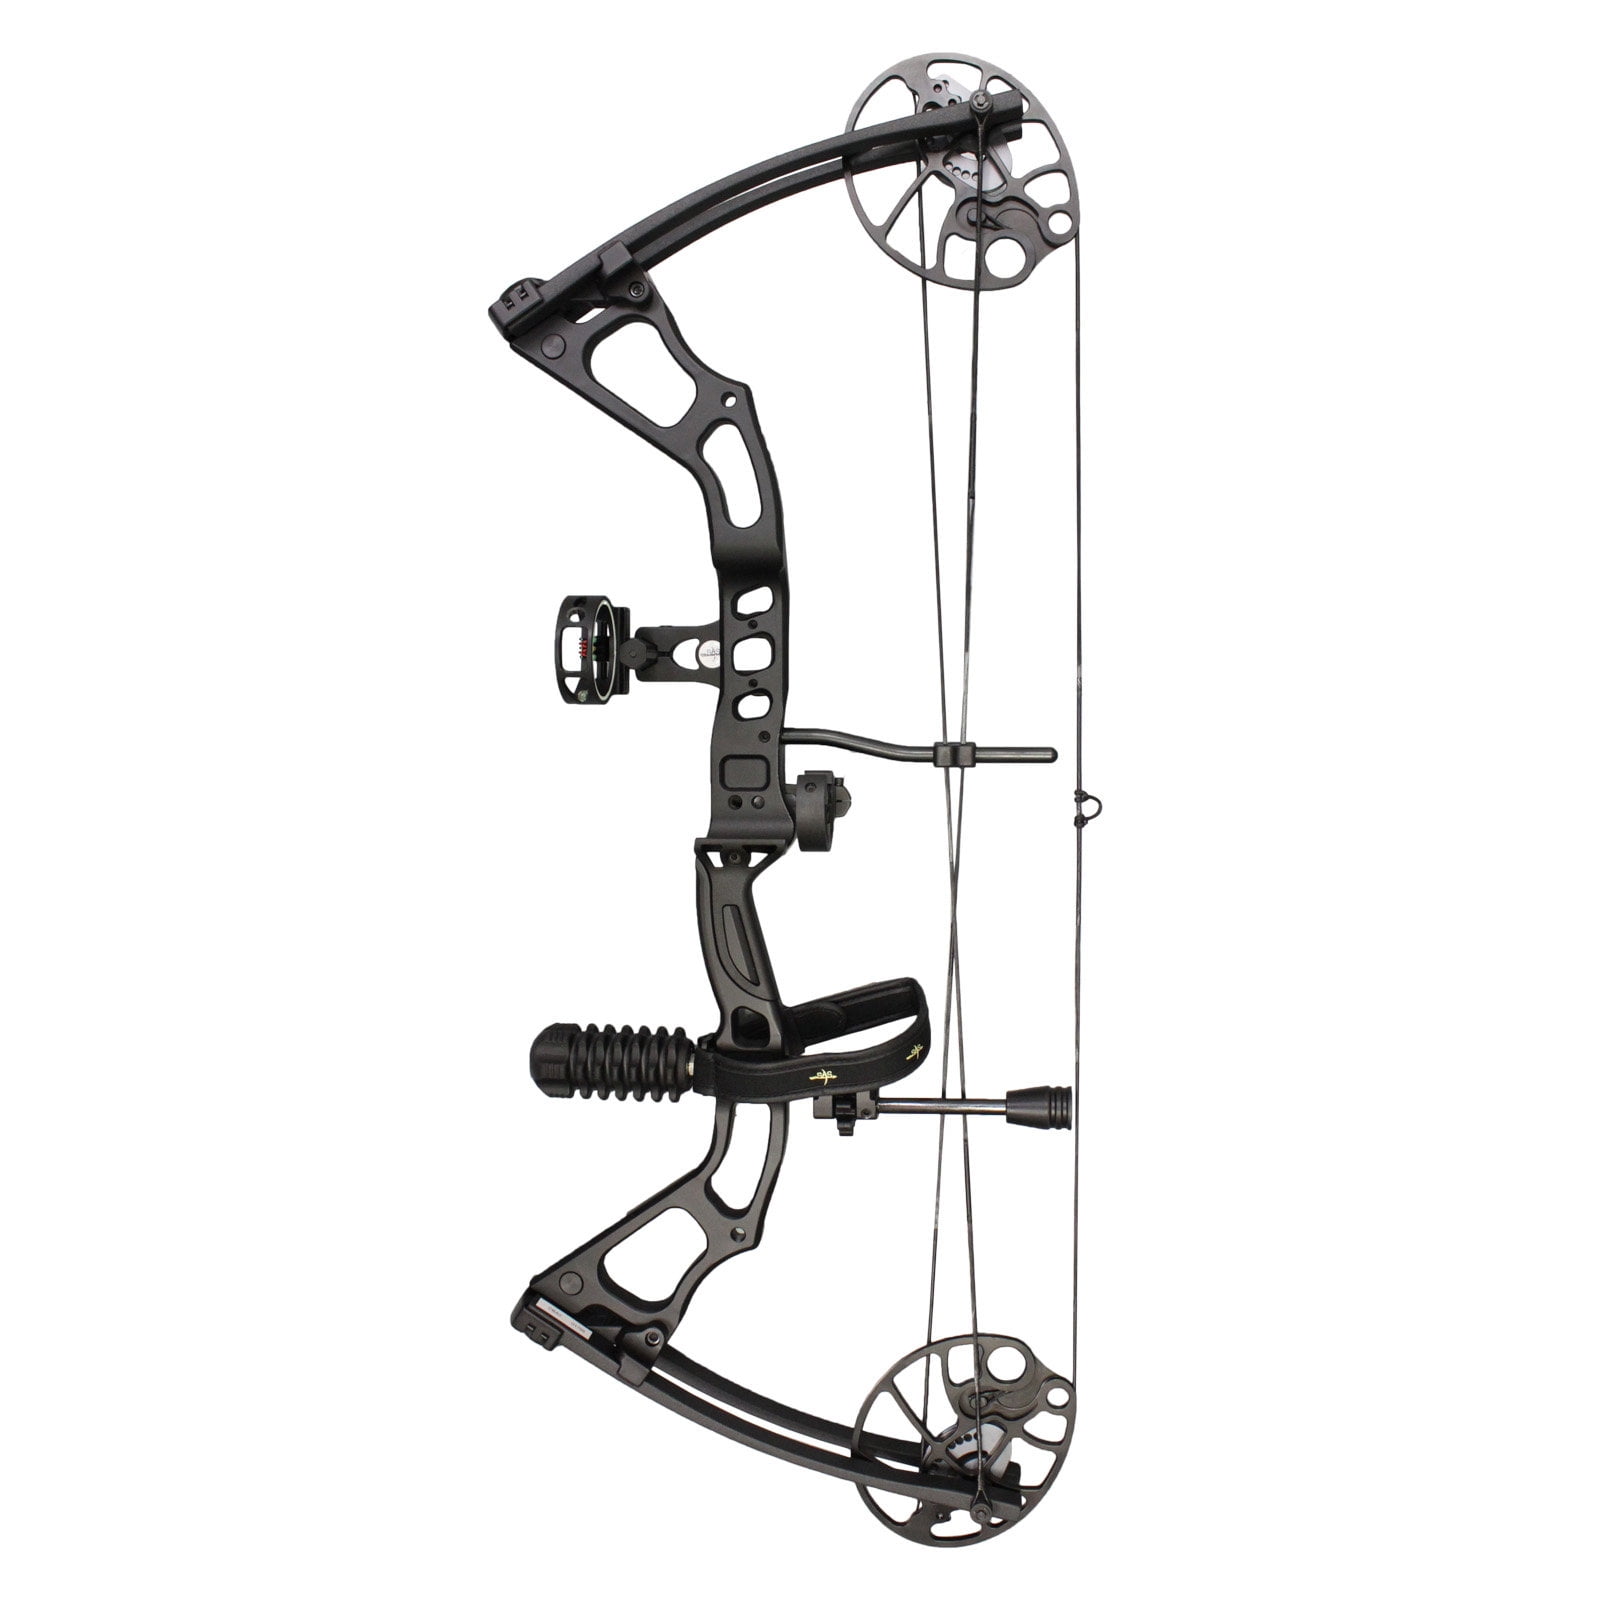 Buy SHARROW Archery Hunting Compound Bow Set with Max Speed 320fps (30-70  lb, Pull Draw Length 23.5-30.5-inch, Camo Color) Online at Low Prices in  India 